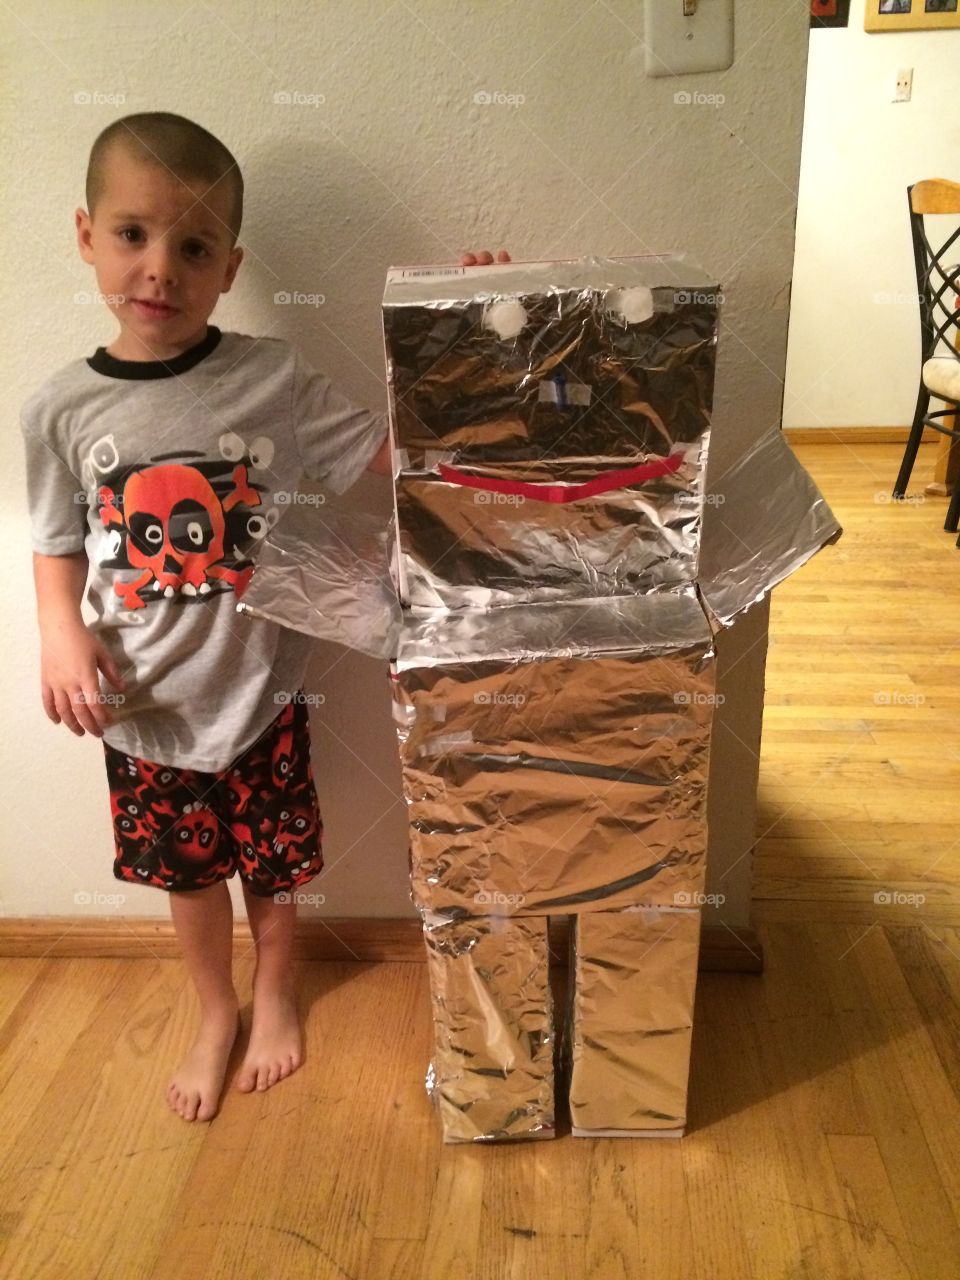 Gage and his robot